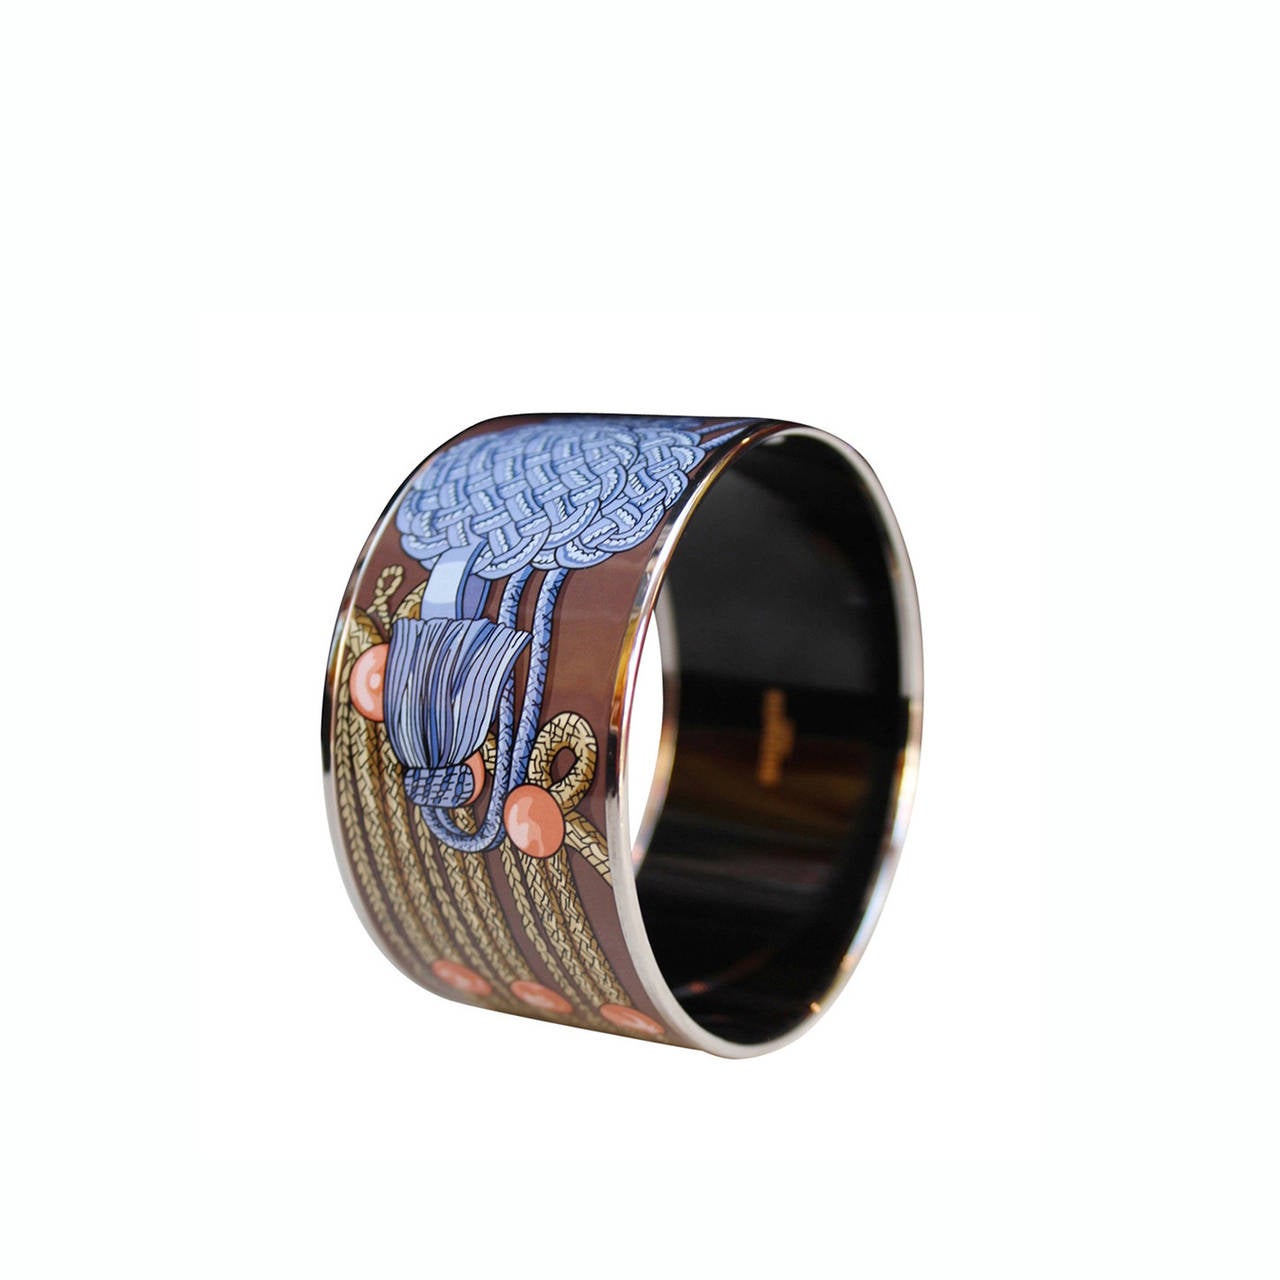 Hermes Brown Enamel Bangle with Blue and Beige Trimmings Design